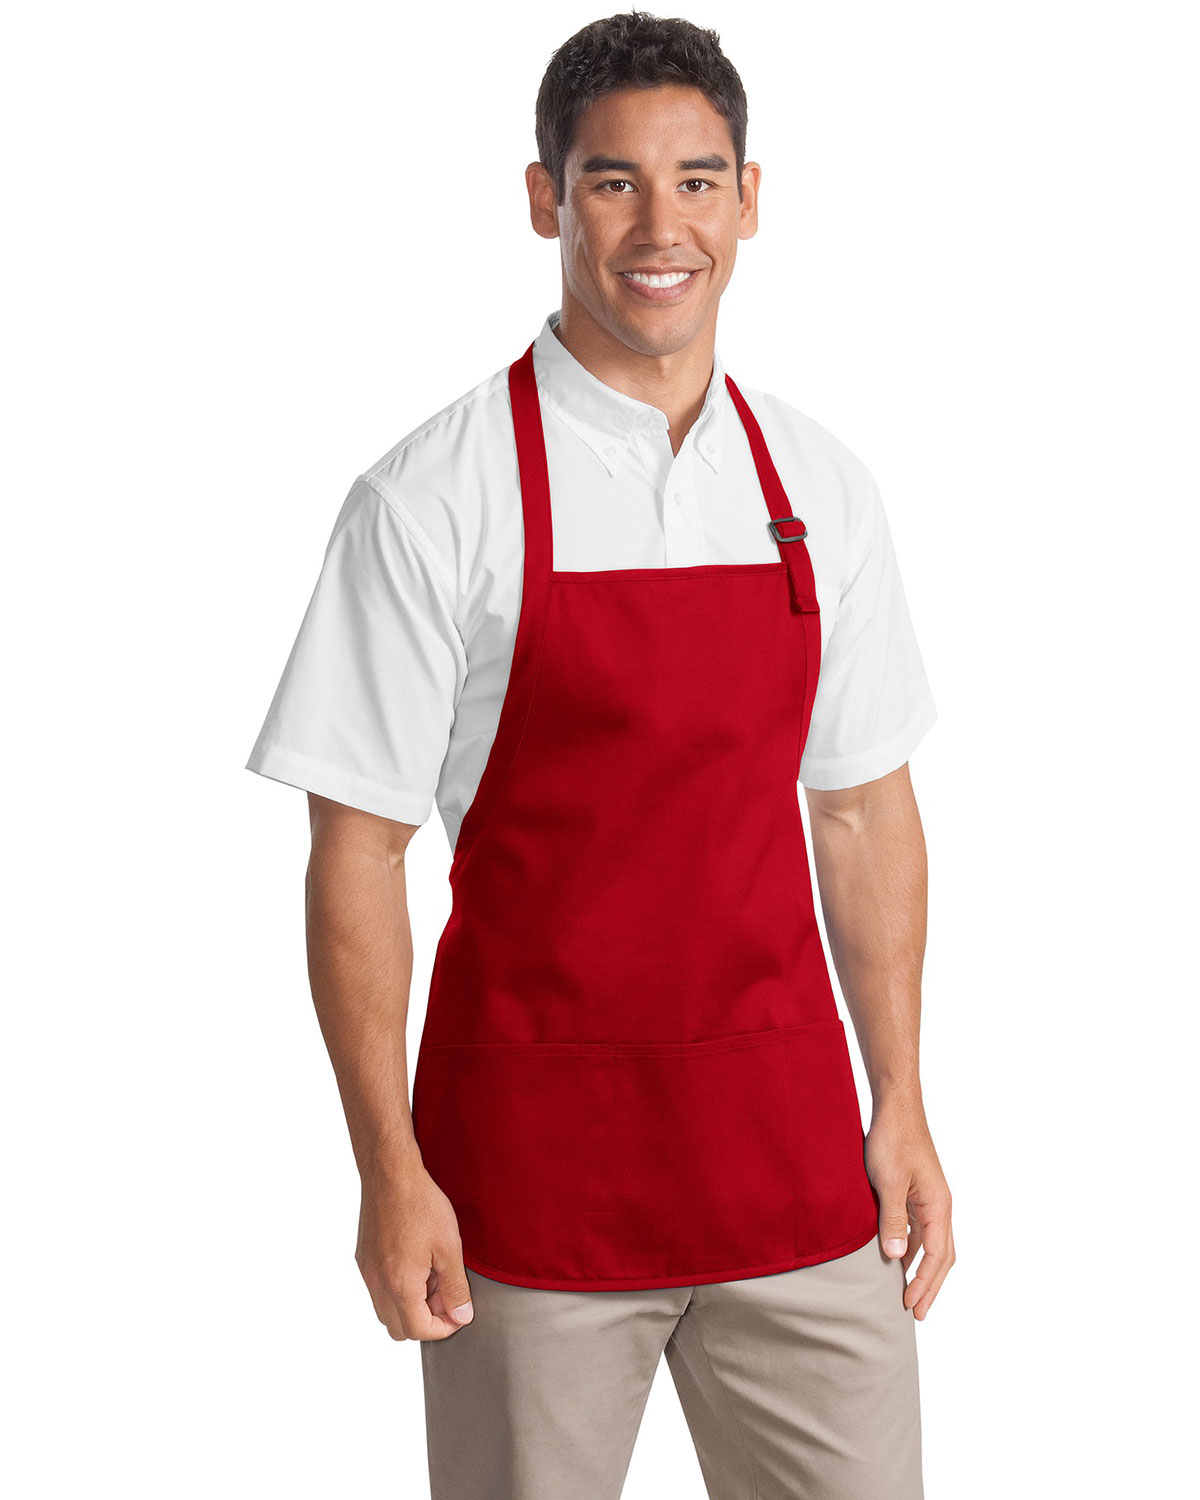 Port Authority A510 Men Medium Length Apron With Pouch Pocket at Apparelstation